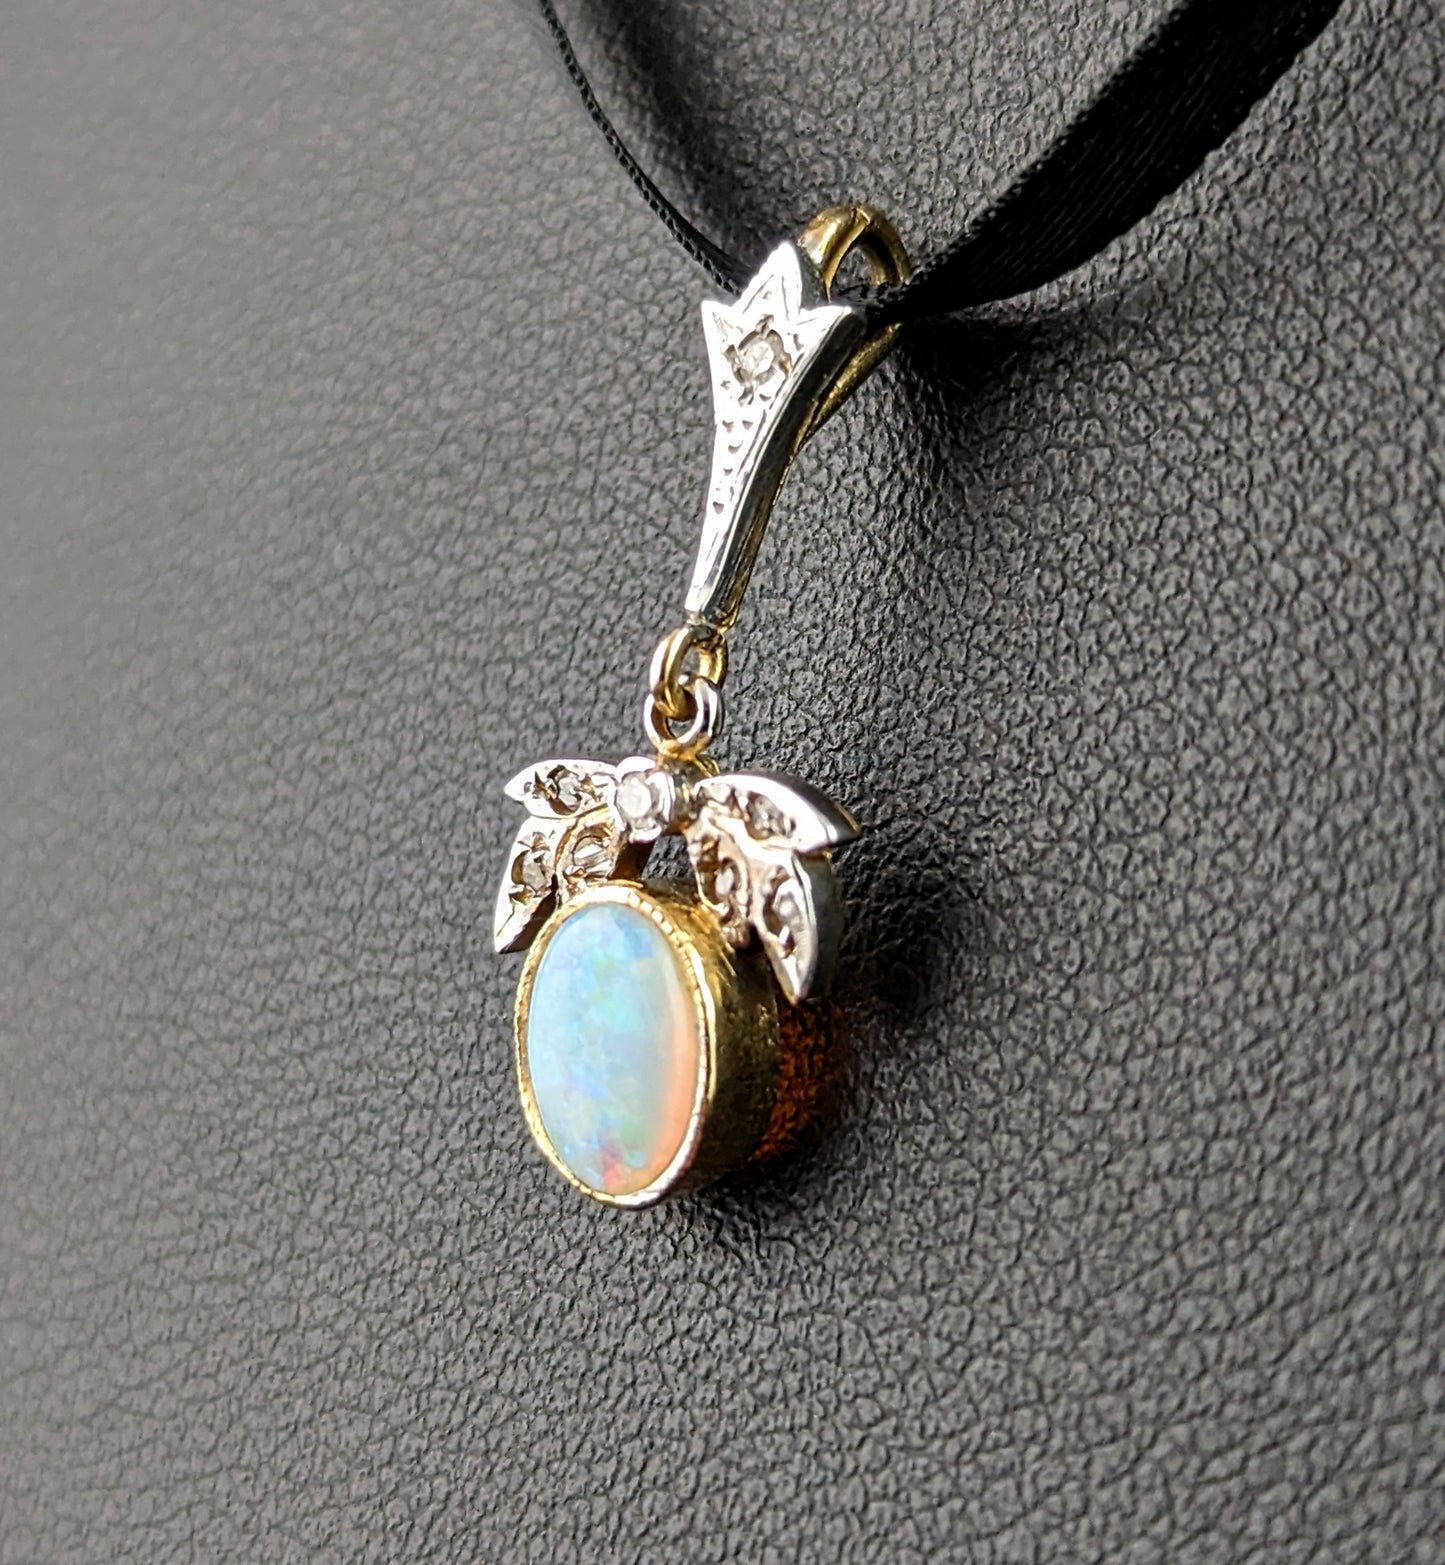 Vintage Opal and Diamond pendant, 9ct gold, Dainty, Art Deco style